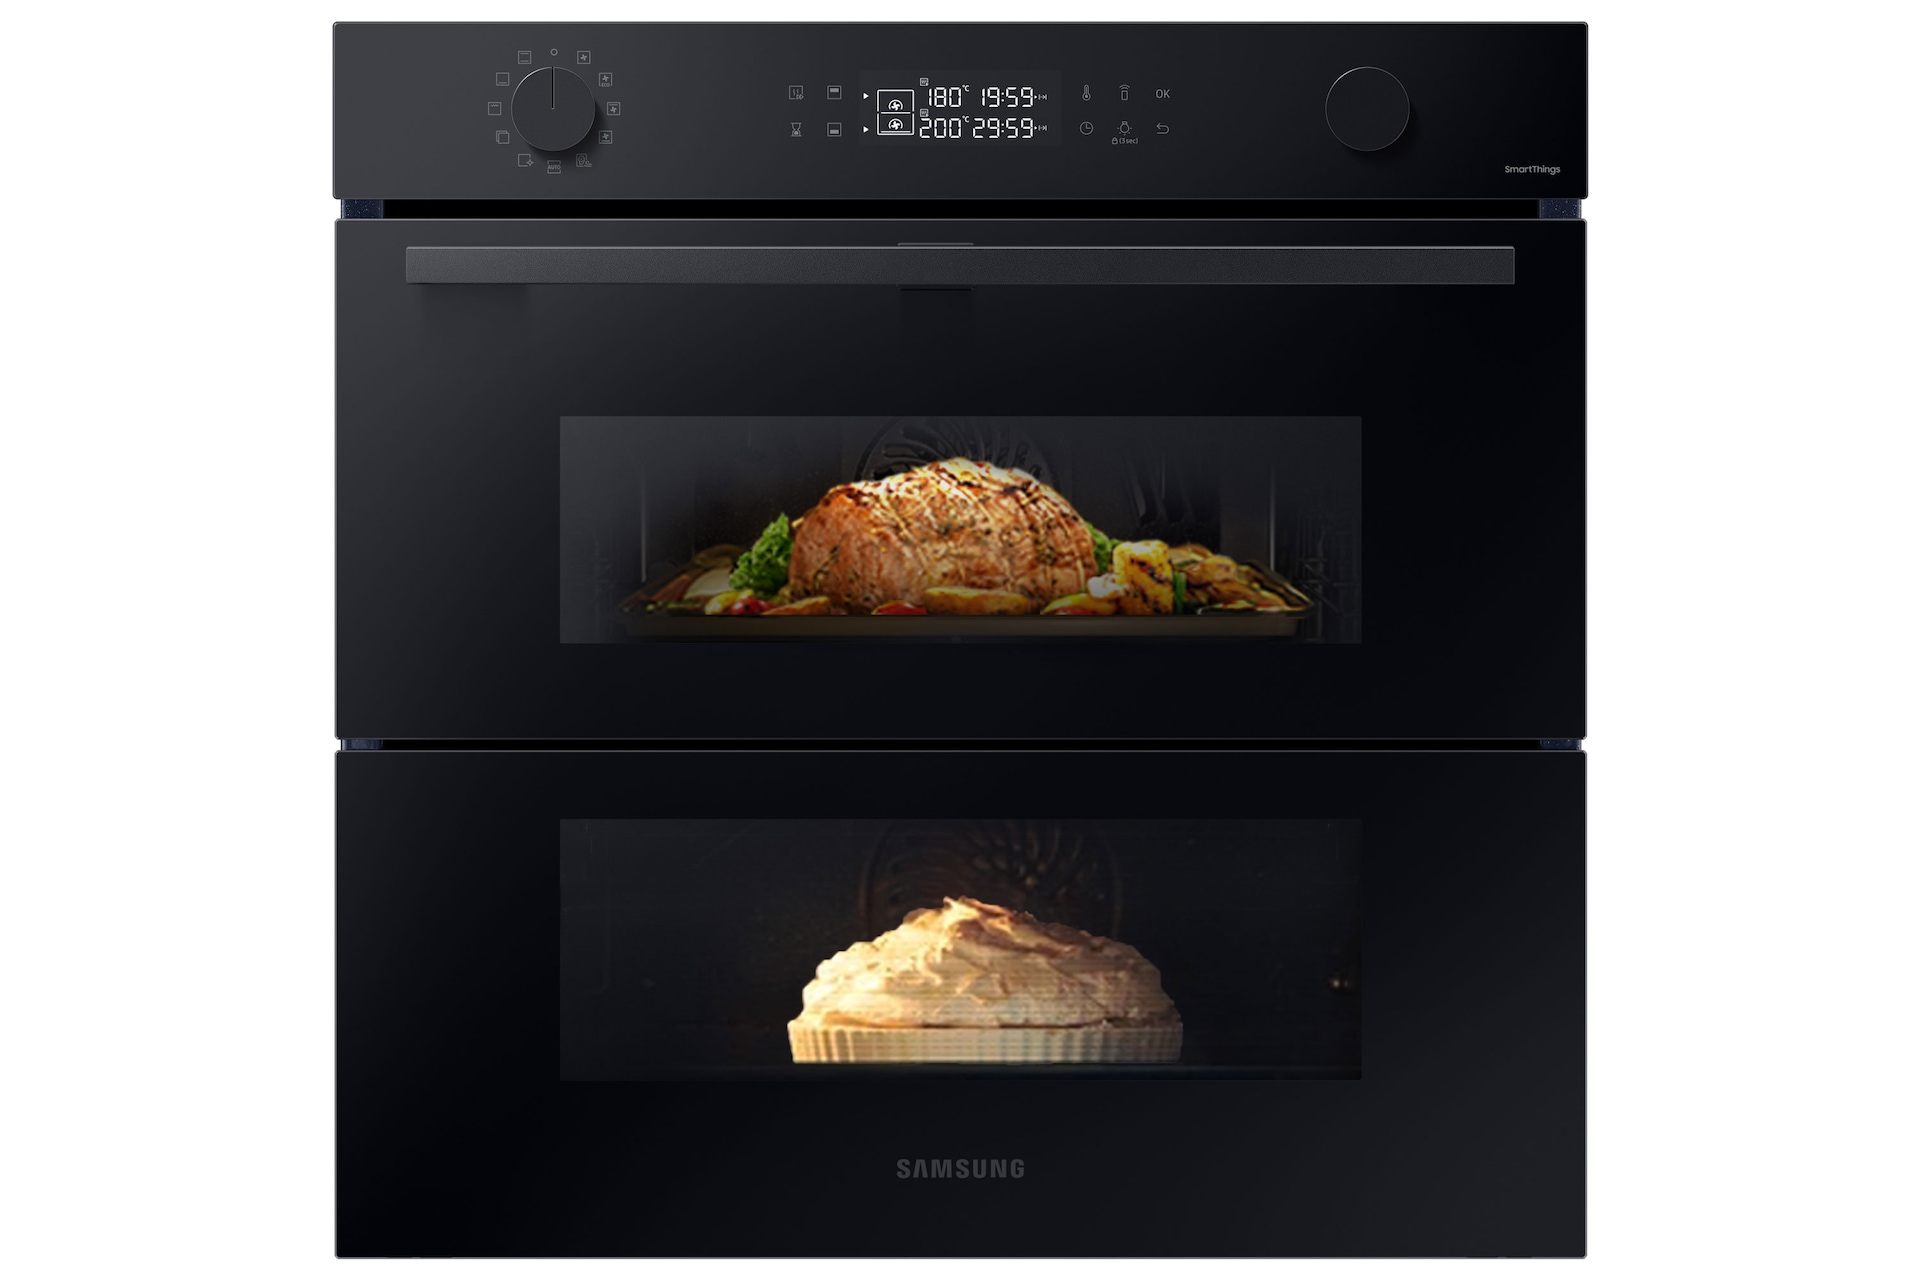 SAMSUNG Series 4 Smart Electric Oven with Dual Cook Flex